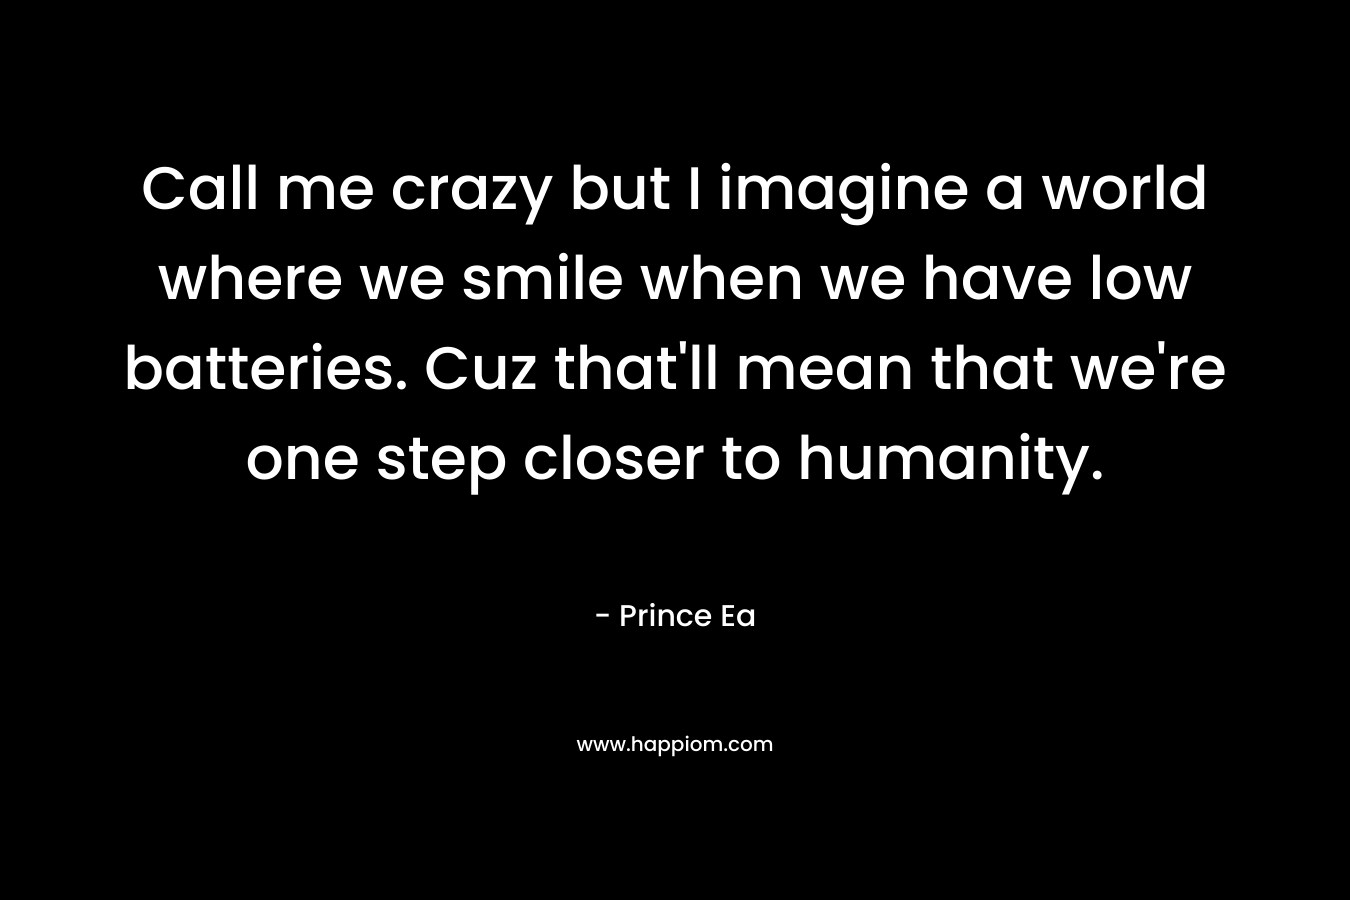 Call me crazy but I imagine a world where we smile when we have low batteries. Cuz that’ll mean that we’re one step closer to humanity. – Prince Ea